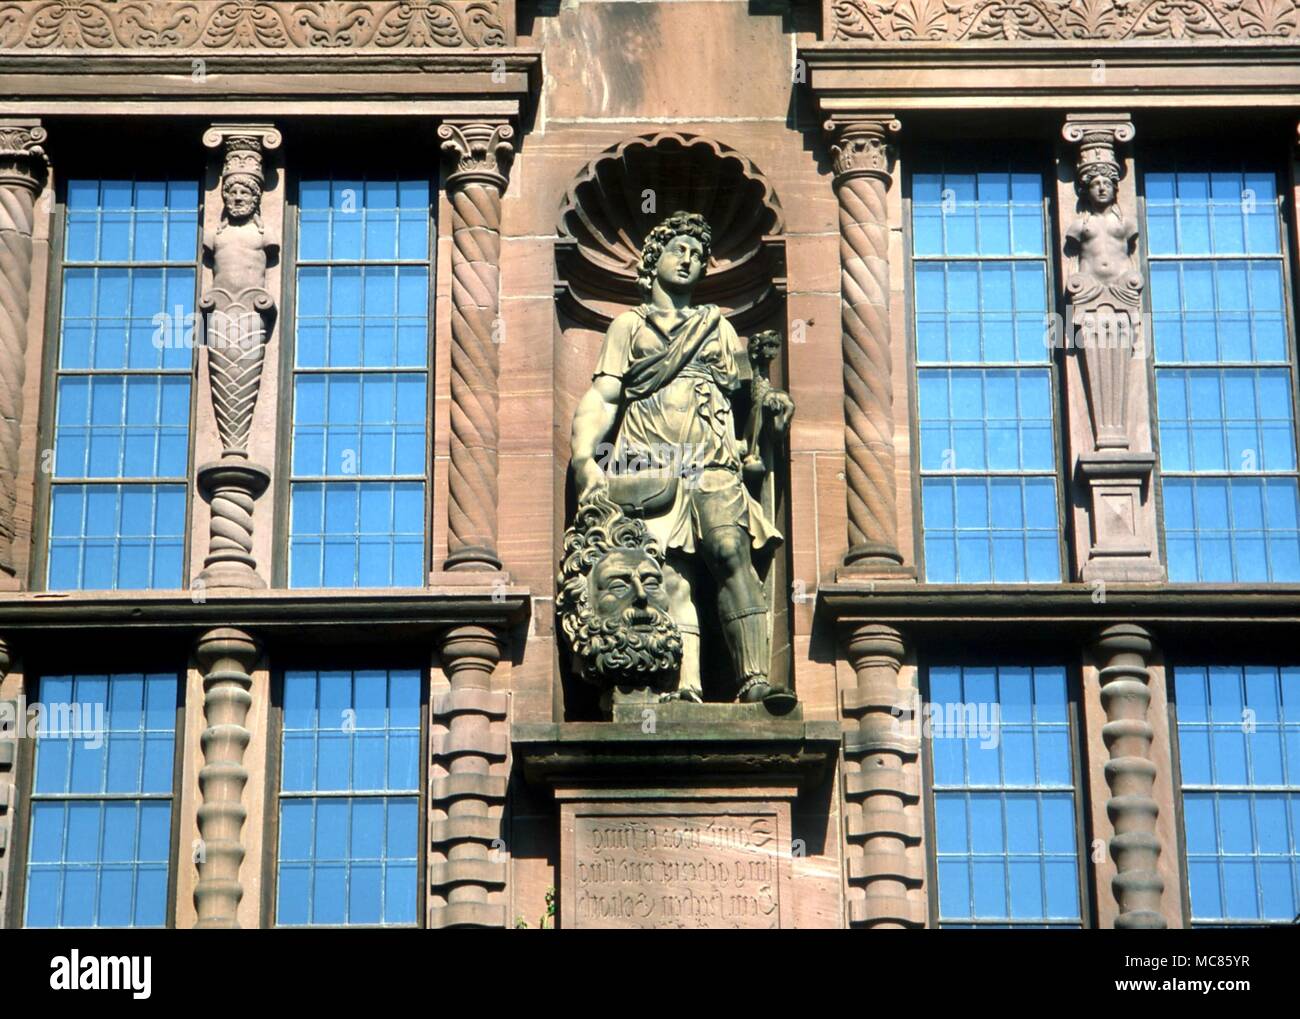 CHRISTIAN David with the head of Goliath, and the lion-symbol. Statue on the facade of the mediaeval castle at Heidelberg, Germany Stock Photo